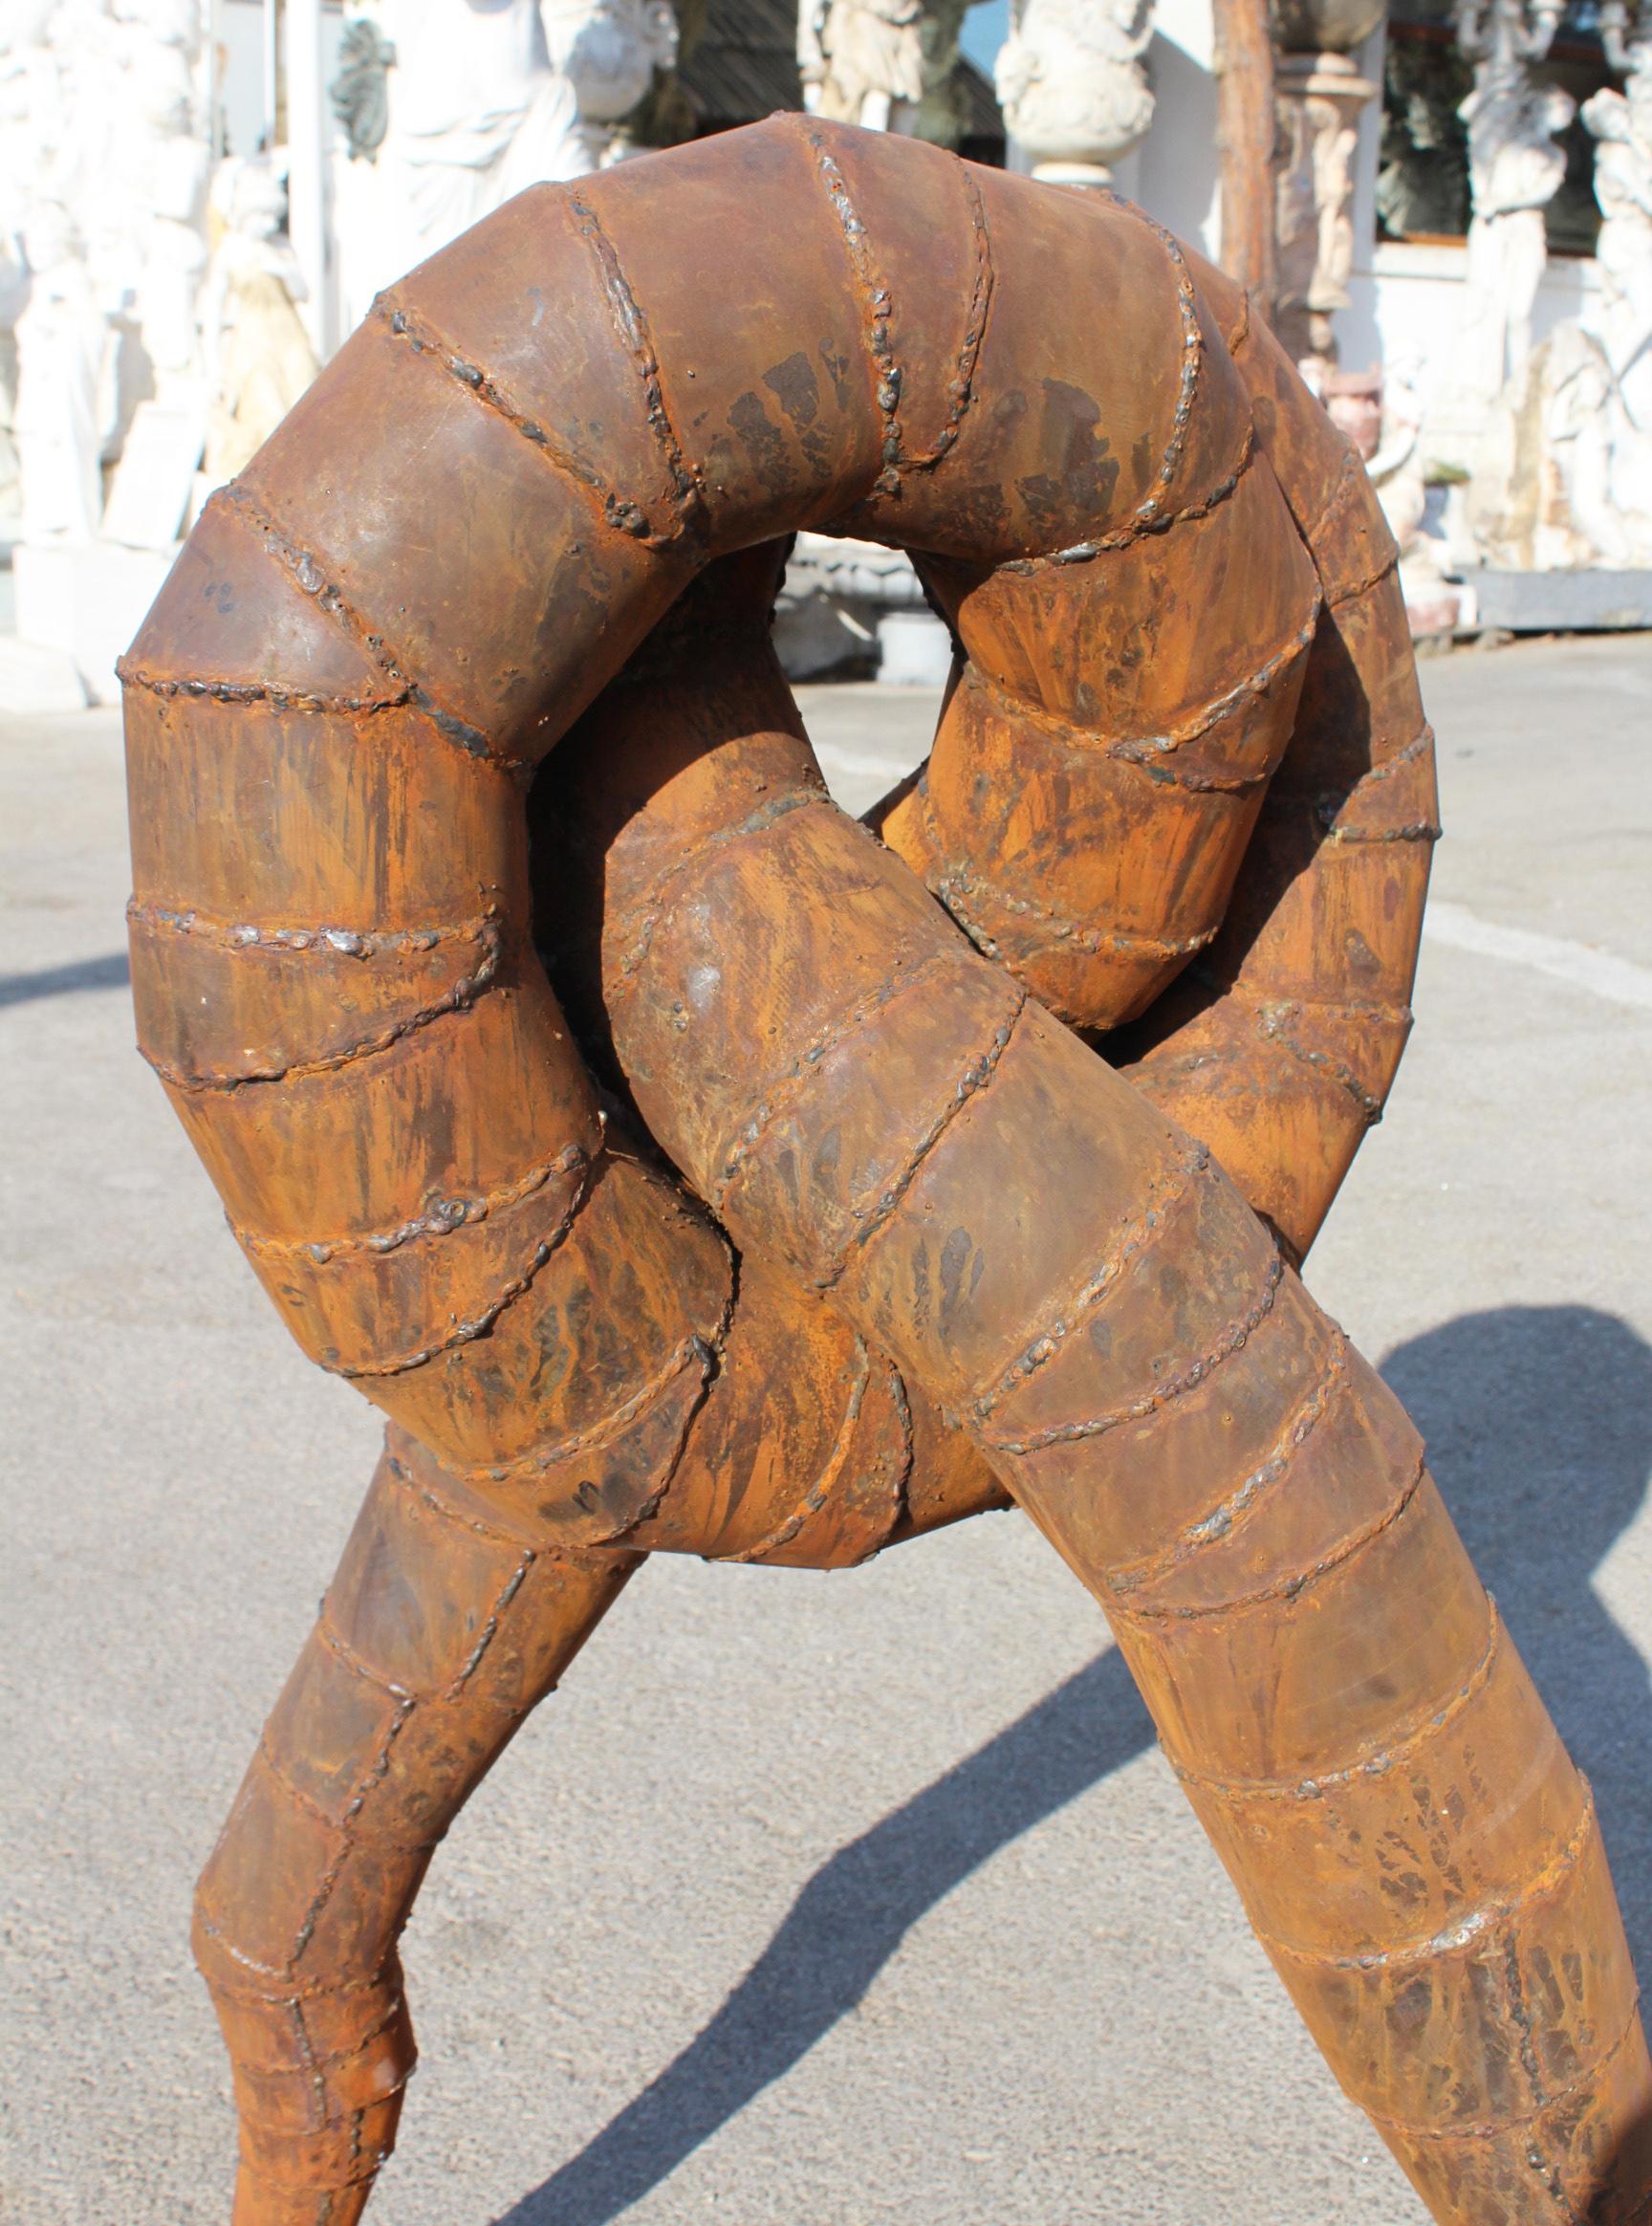 Contemporary Surrealist Iron Sculpture Where Intertwined Legs Form the Body